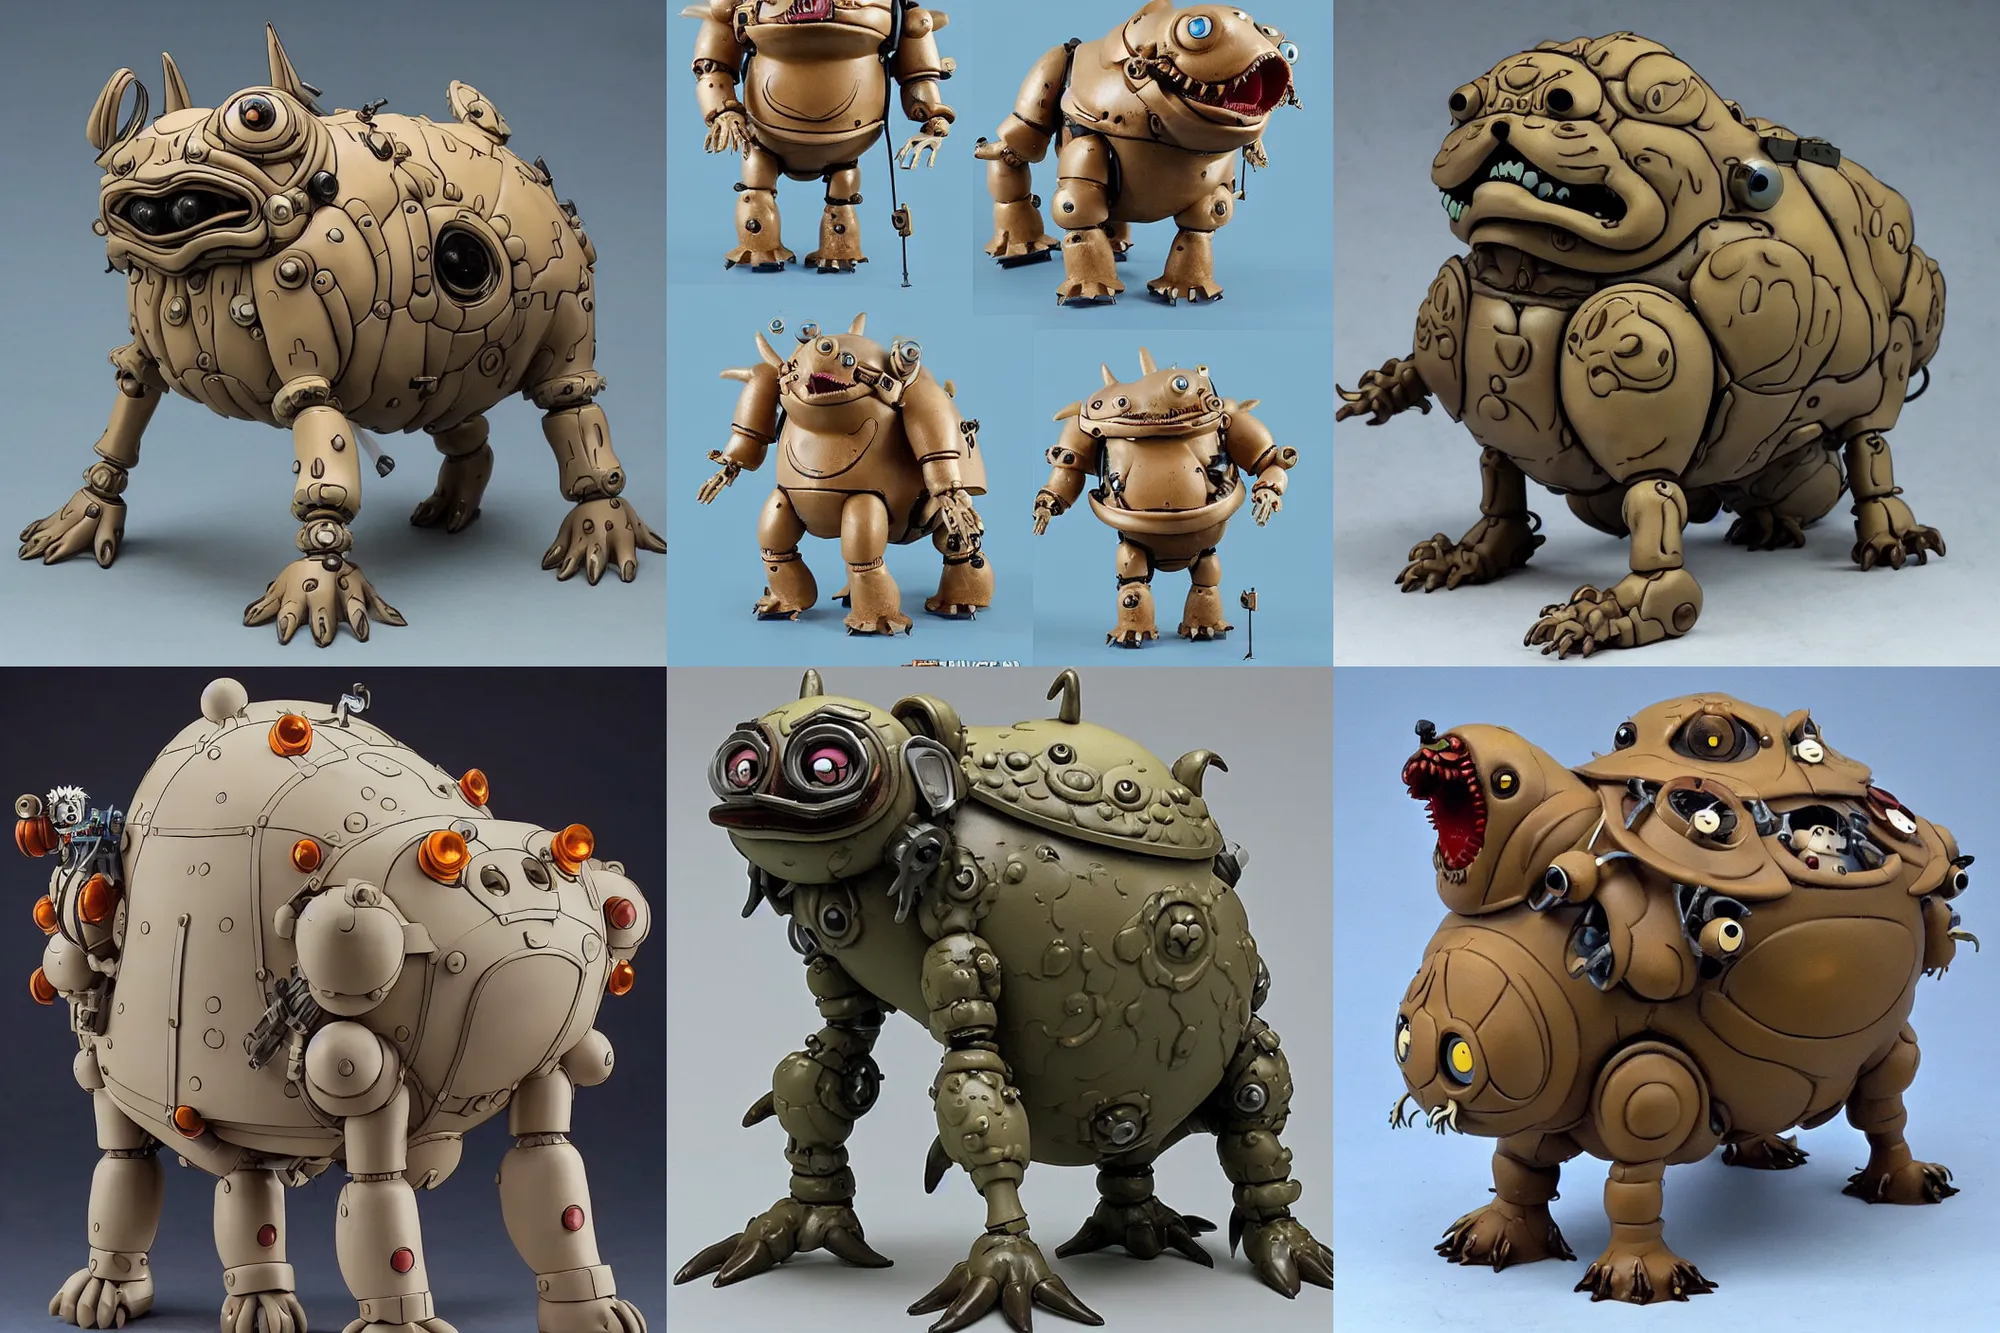 Prompt: A Lovecraftian giant mechanized adorable Pug from Studio Ghibli Howl's Moving Castle (2004) as a 1980's Kenner style action figure, 5 points of articulation, zoomed out full body, 4k, highly detailed. award winning sci-fi. look at all that detail!